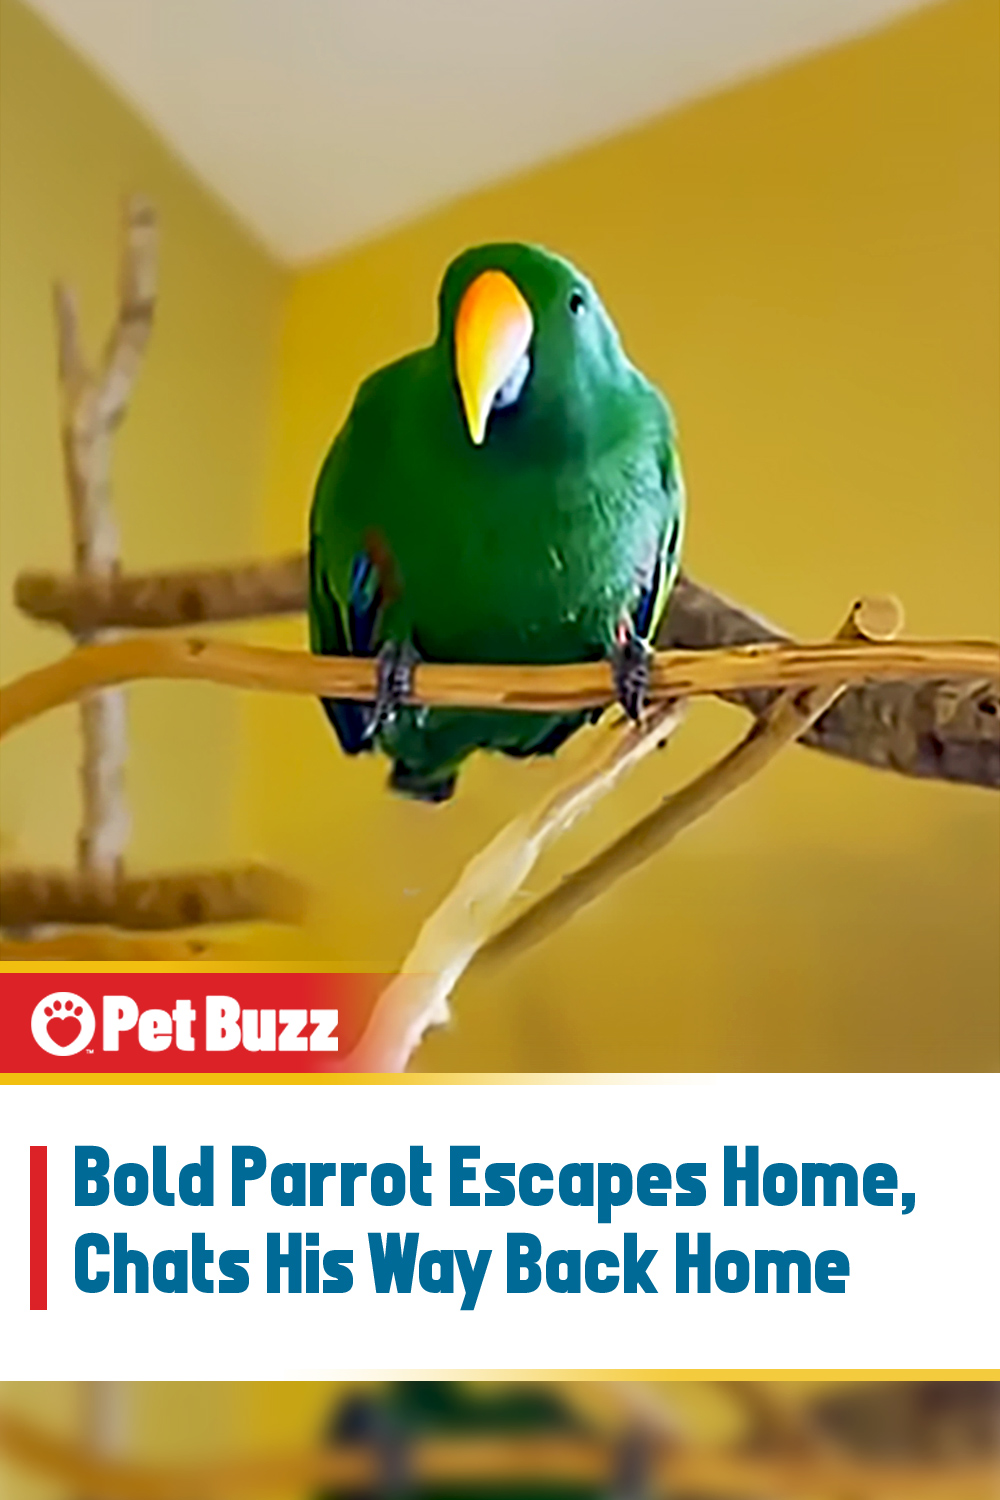 Bold Parrot Escapes Home, Chats His Way Back Home